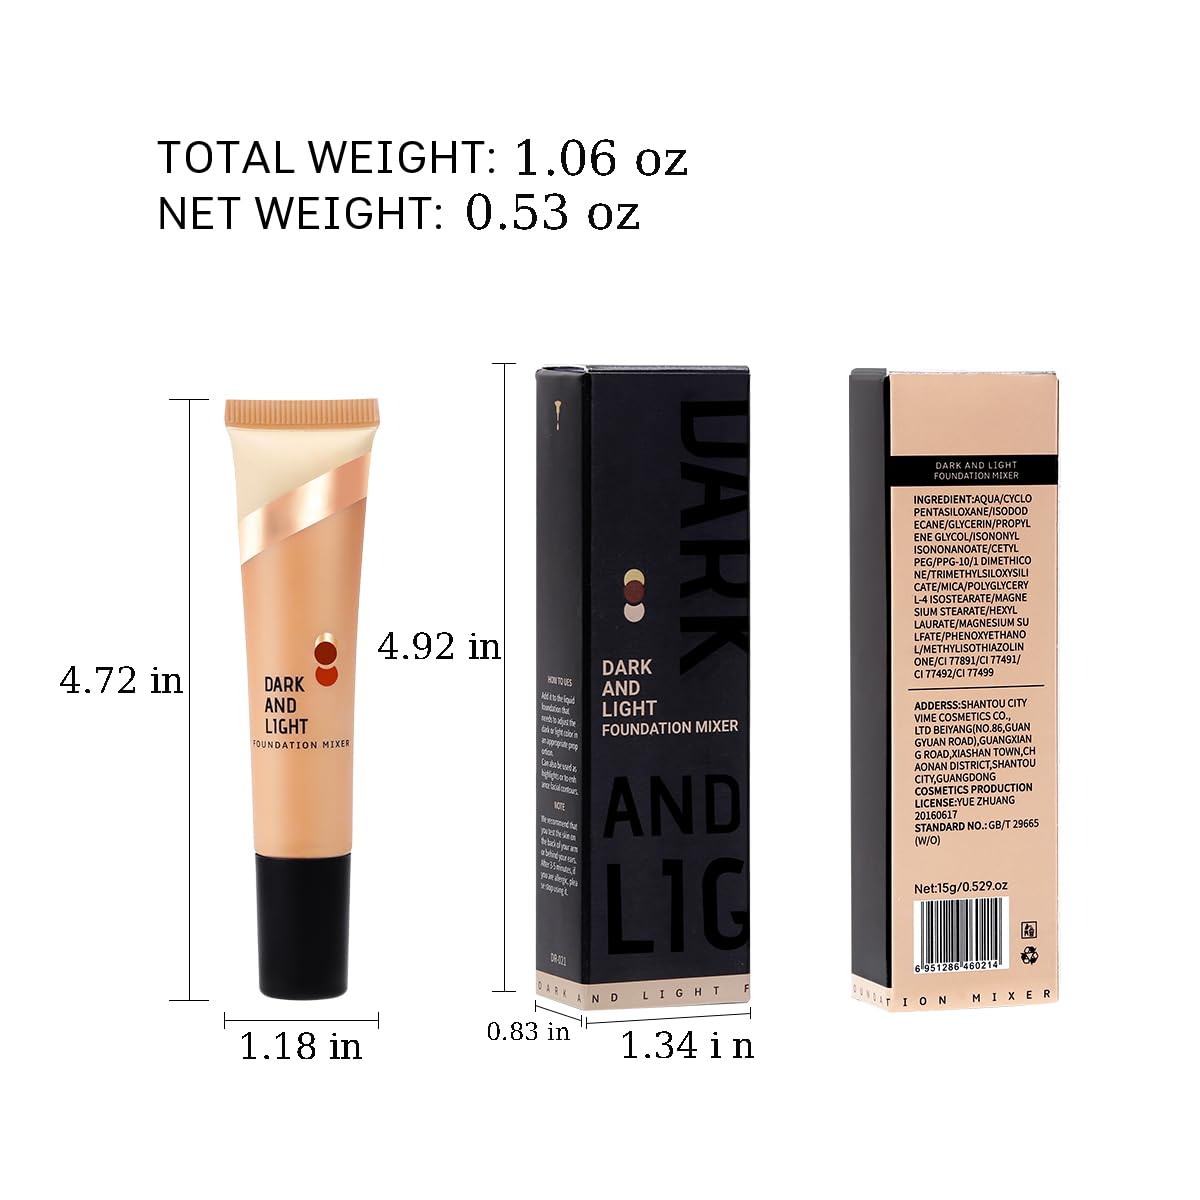 KISSIO Foundation Mixer,Foundation Mixing Pigment,Color Corrector,Foundation Adjusting Drops for Light Foundation,Smooth and Easy to Use,Blends Easily With Foundation,1.06 oz(02# caramel)